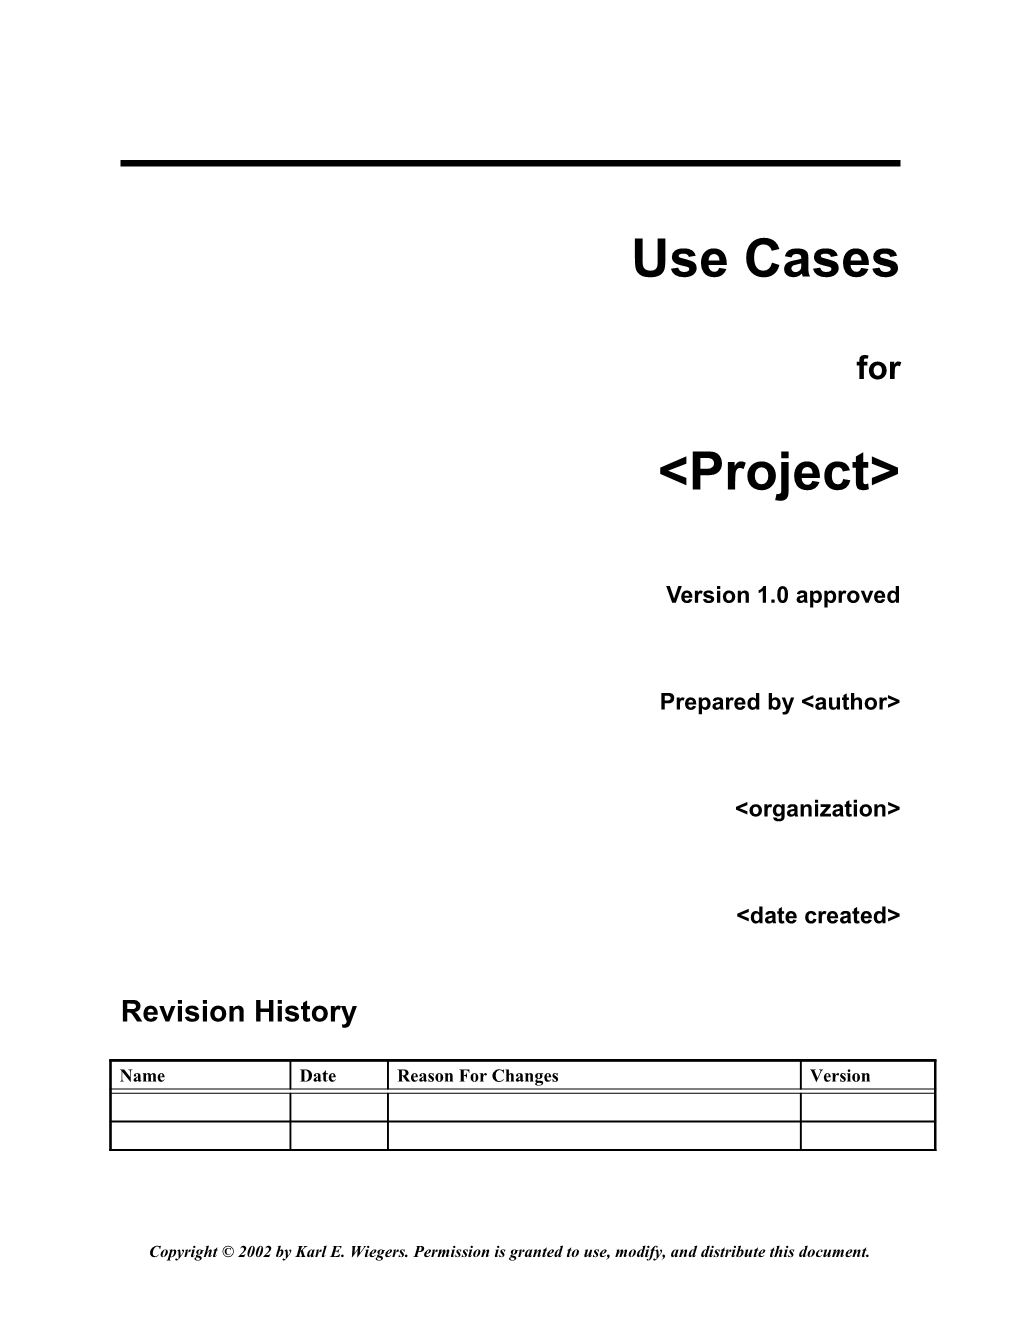 Use Case Template s2